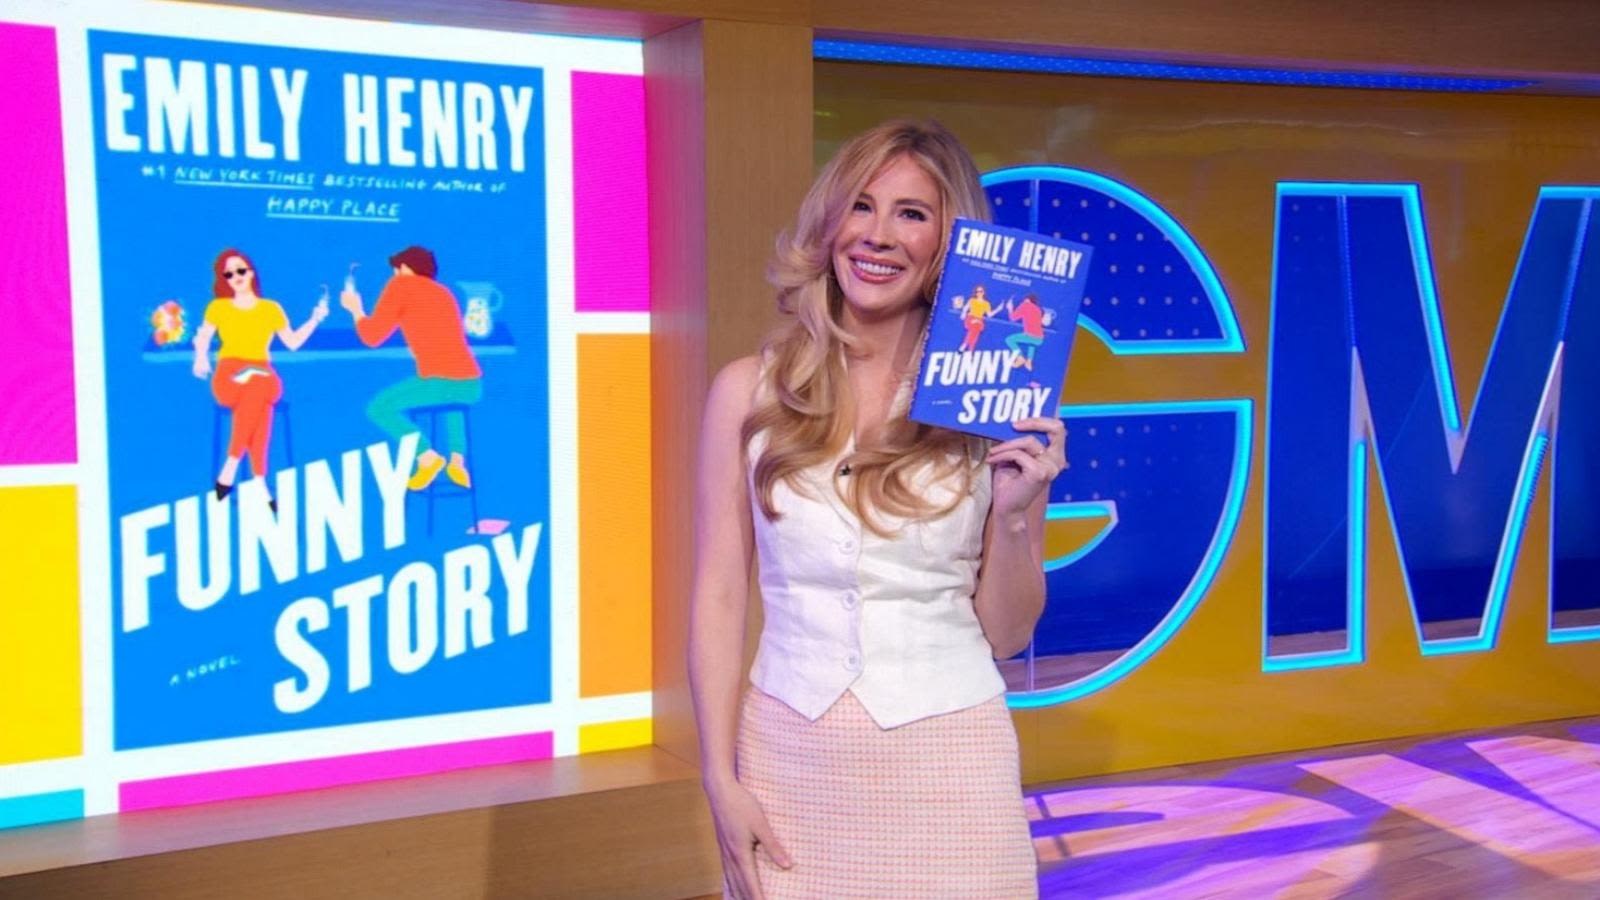 Emily Henry to adapt bestselling novel 'Funny Story' into movie: 'I have a draft for a script'